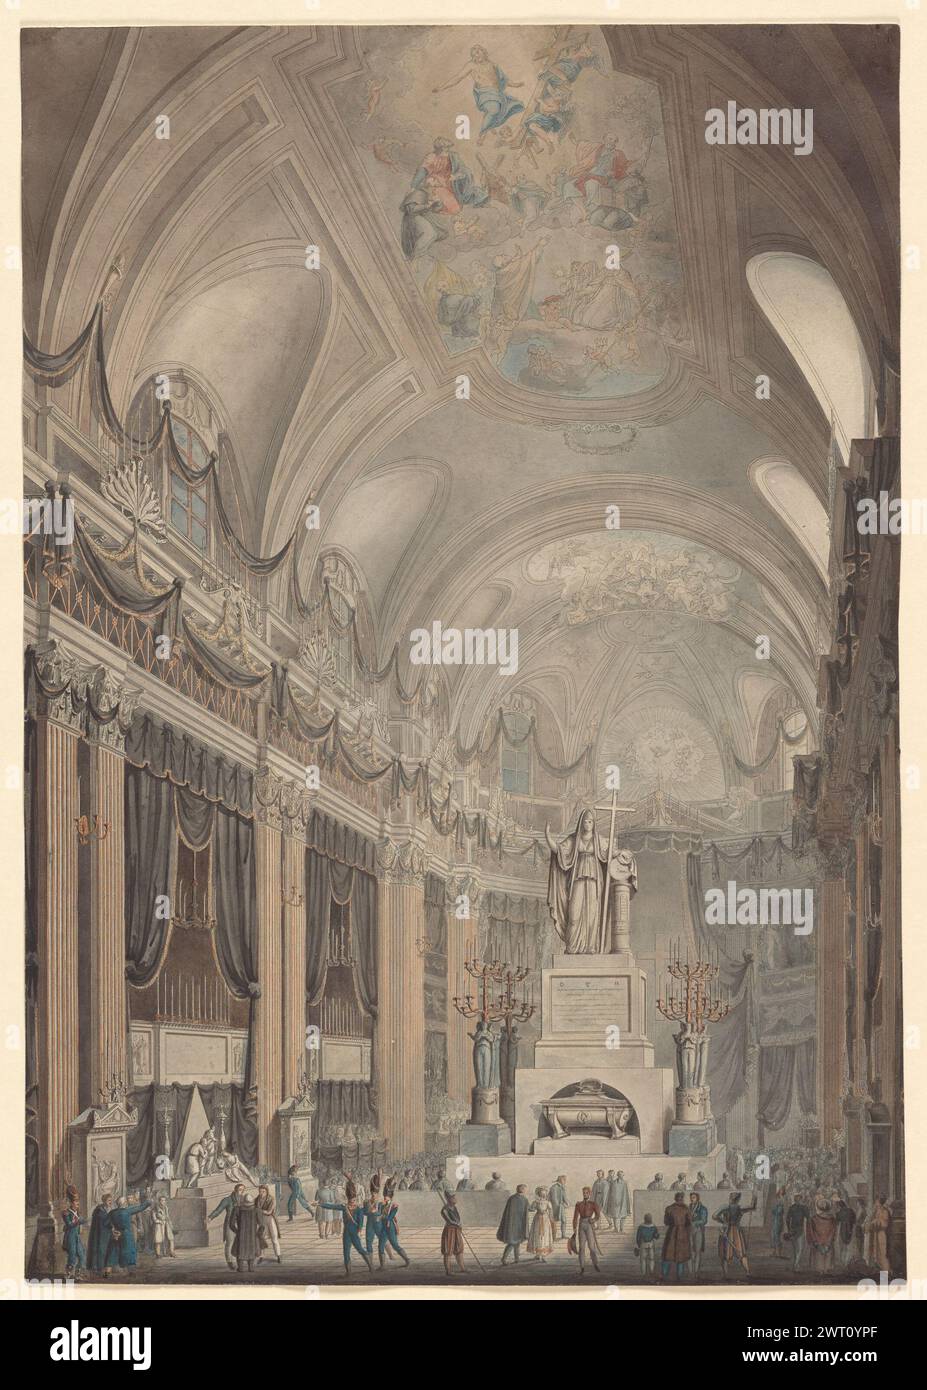 Solemn funeral pomp observed in Rome in the Church of the Apostles for the funeral of the deceased Marquis Antonio Canova, circa 1823. [ca. 1823] Church of the Apostles The print, after a drawing by Giuseppe Valadier, depicts the funeral of sculptor Antonio Canova held in the Church of the Apostles (Chiesa dei Ss. Apostoli). The interior has been draped with black hangings and illuminated with large candelabra. Canova's Tomb of the Archduchess Maria Christina of Austria is shown on the left. Title and date from Anna Villari's essay 'Apoteosi funeraria di Canova a Roma: Fortuna e sfortuna negli Stock Photo